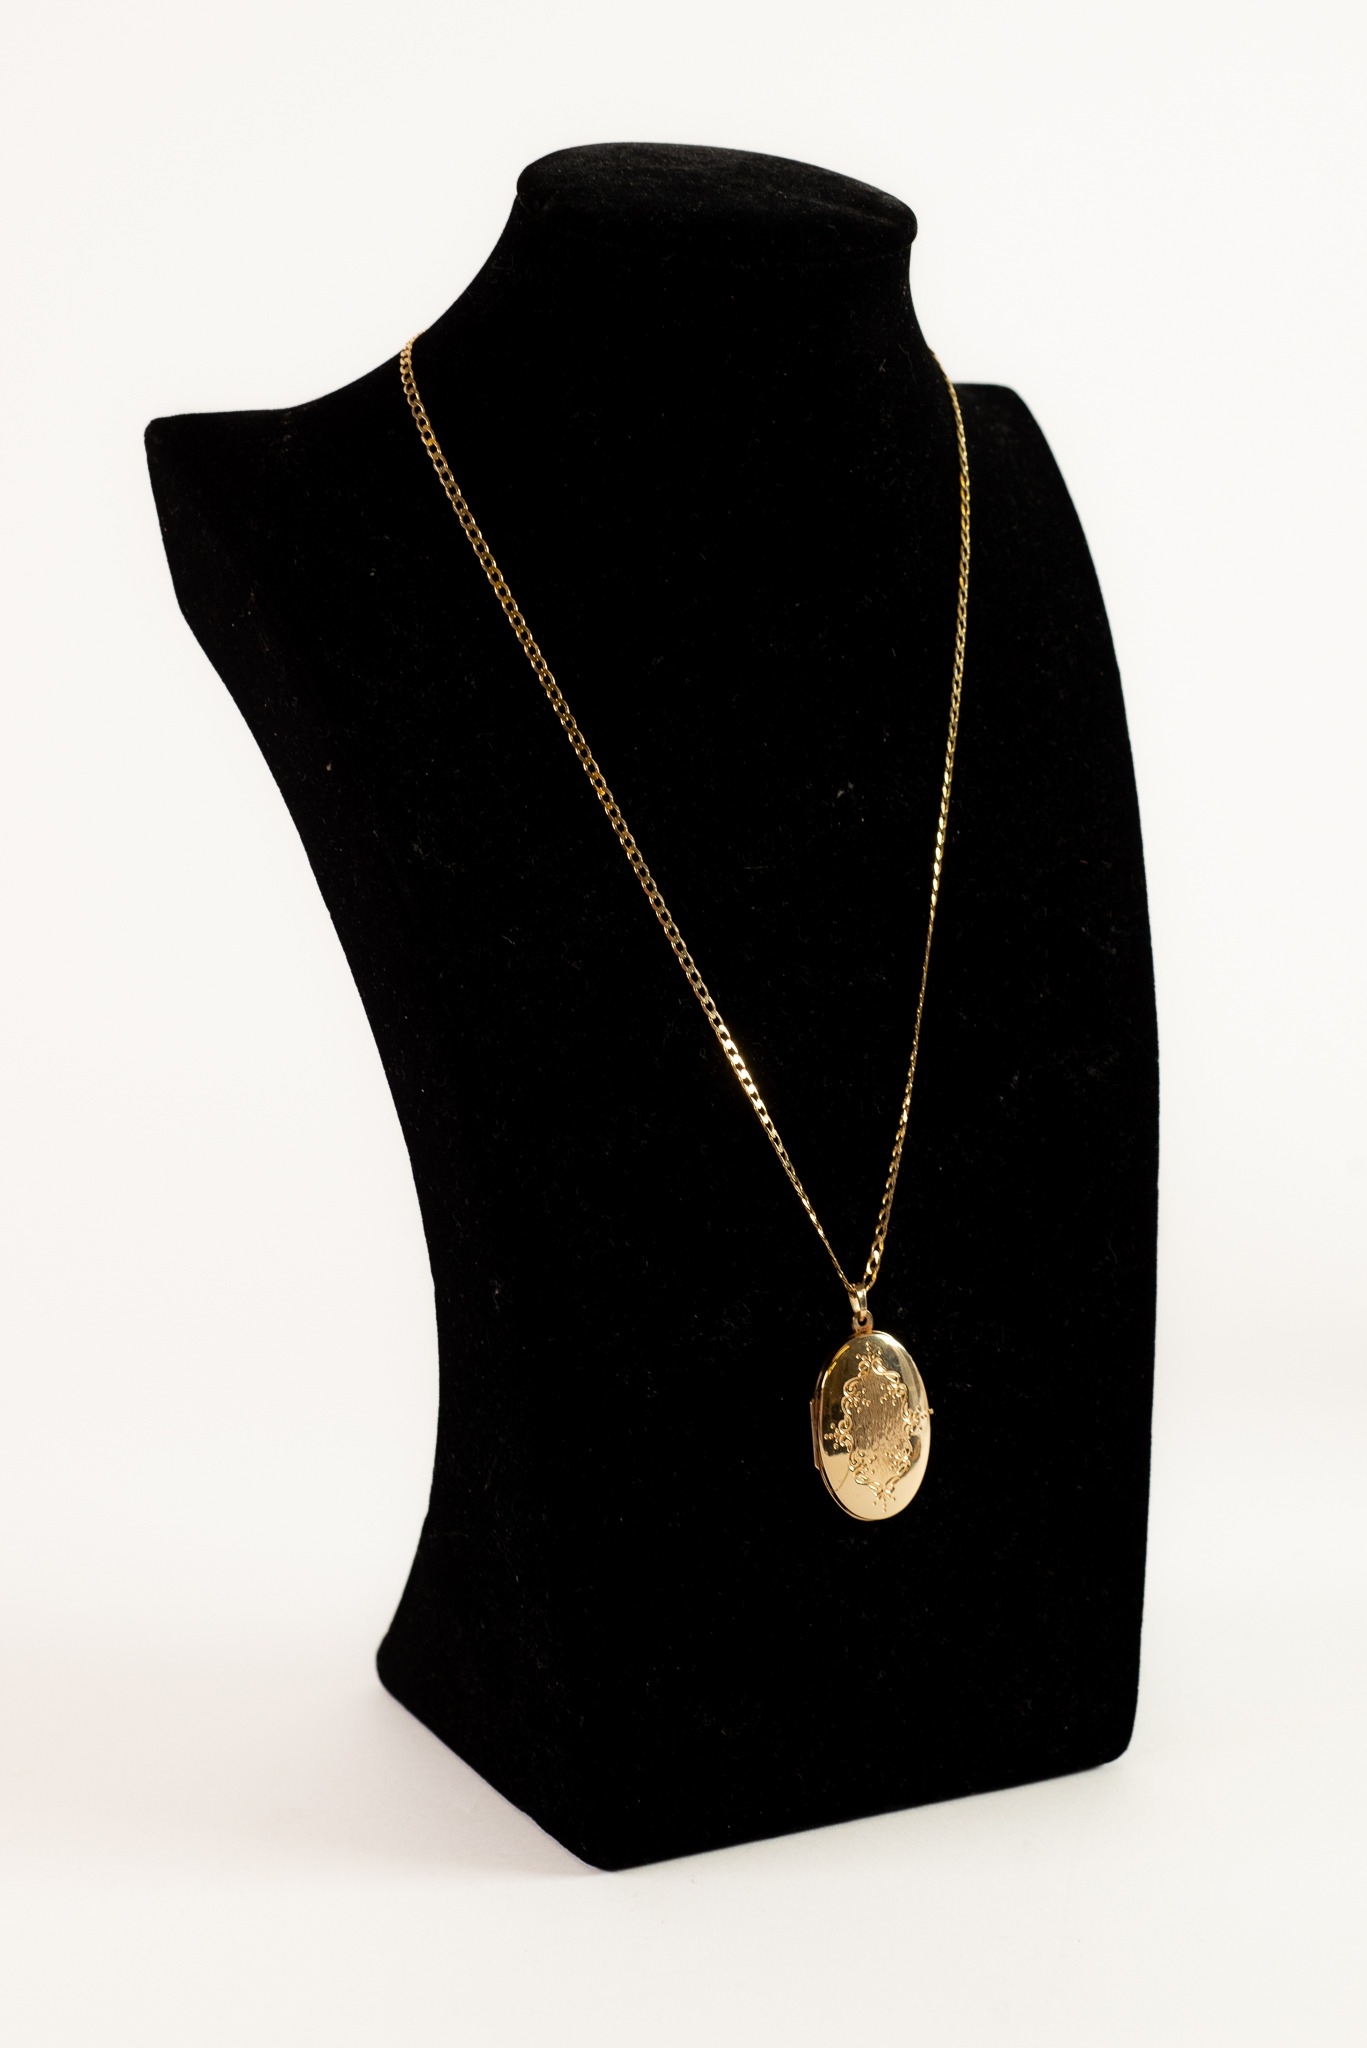 MODERN 9ct GOLD OVAL LOCKET ON 9ct GOLD FLATTENED-LINK CHAIN, 9.1 gms gross